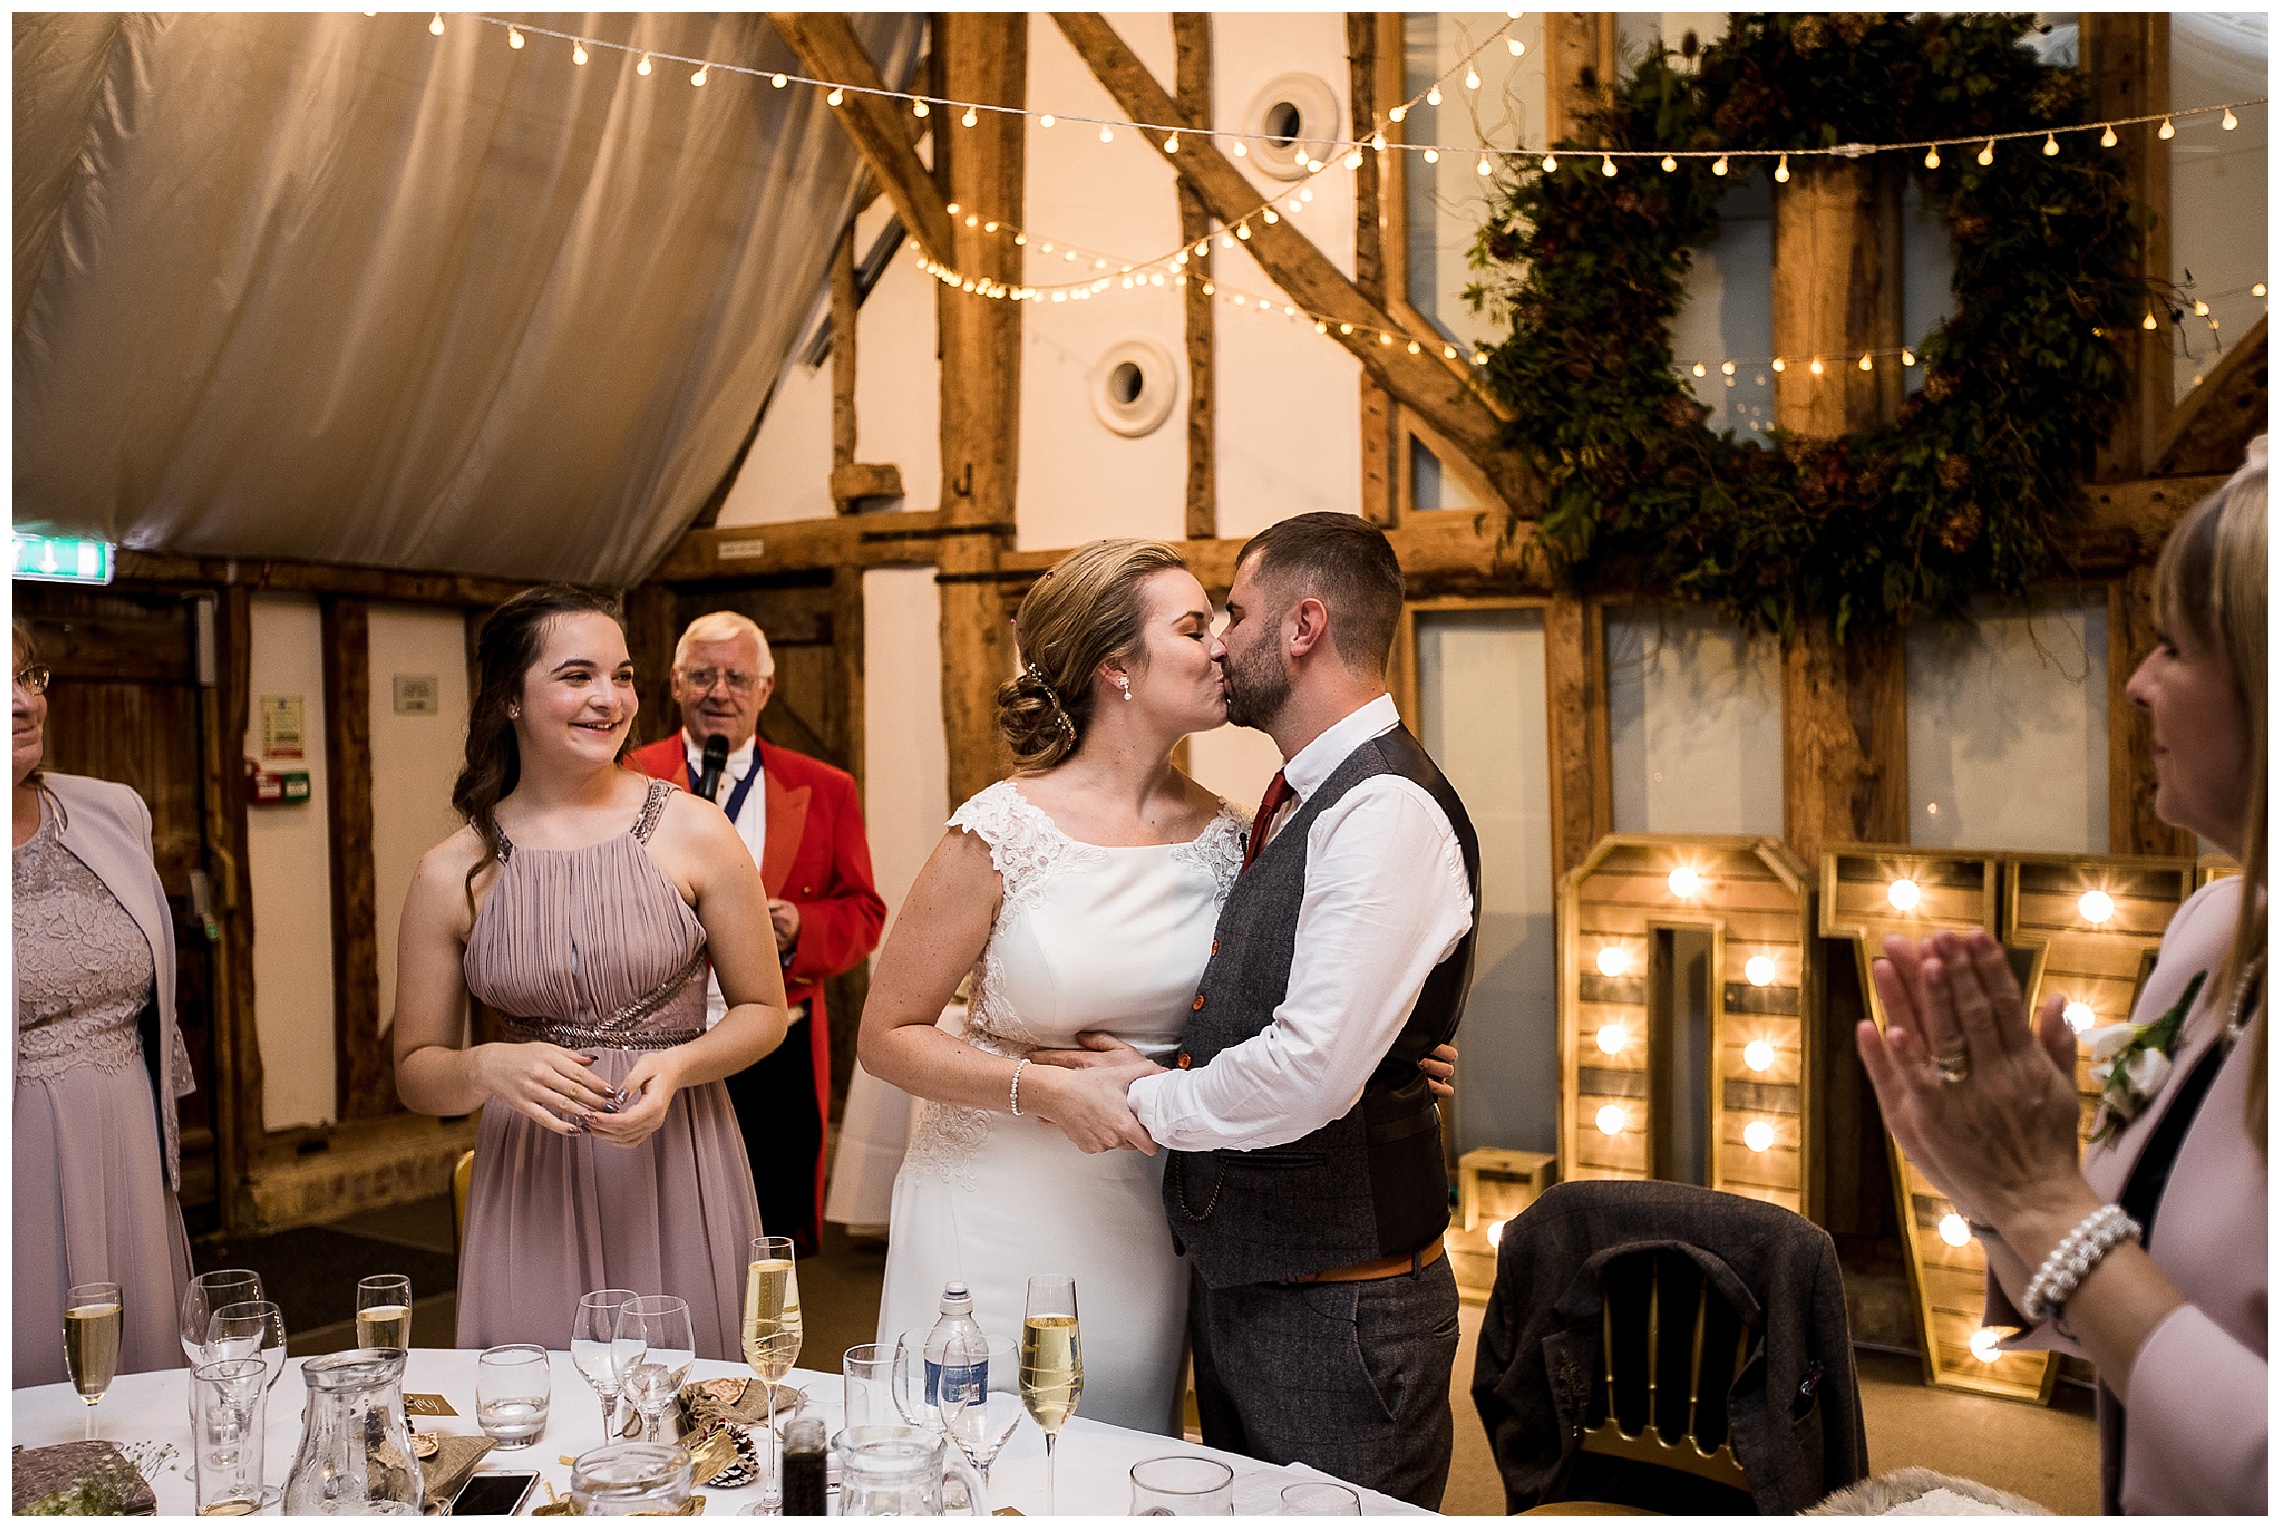 bride and groom kiss at top table with family onlooking and smiling after speeches